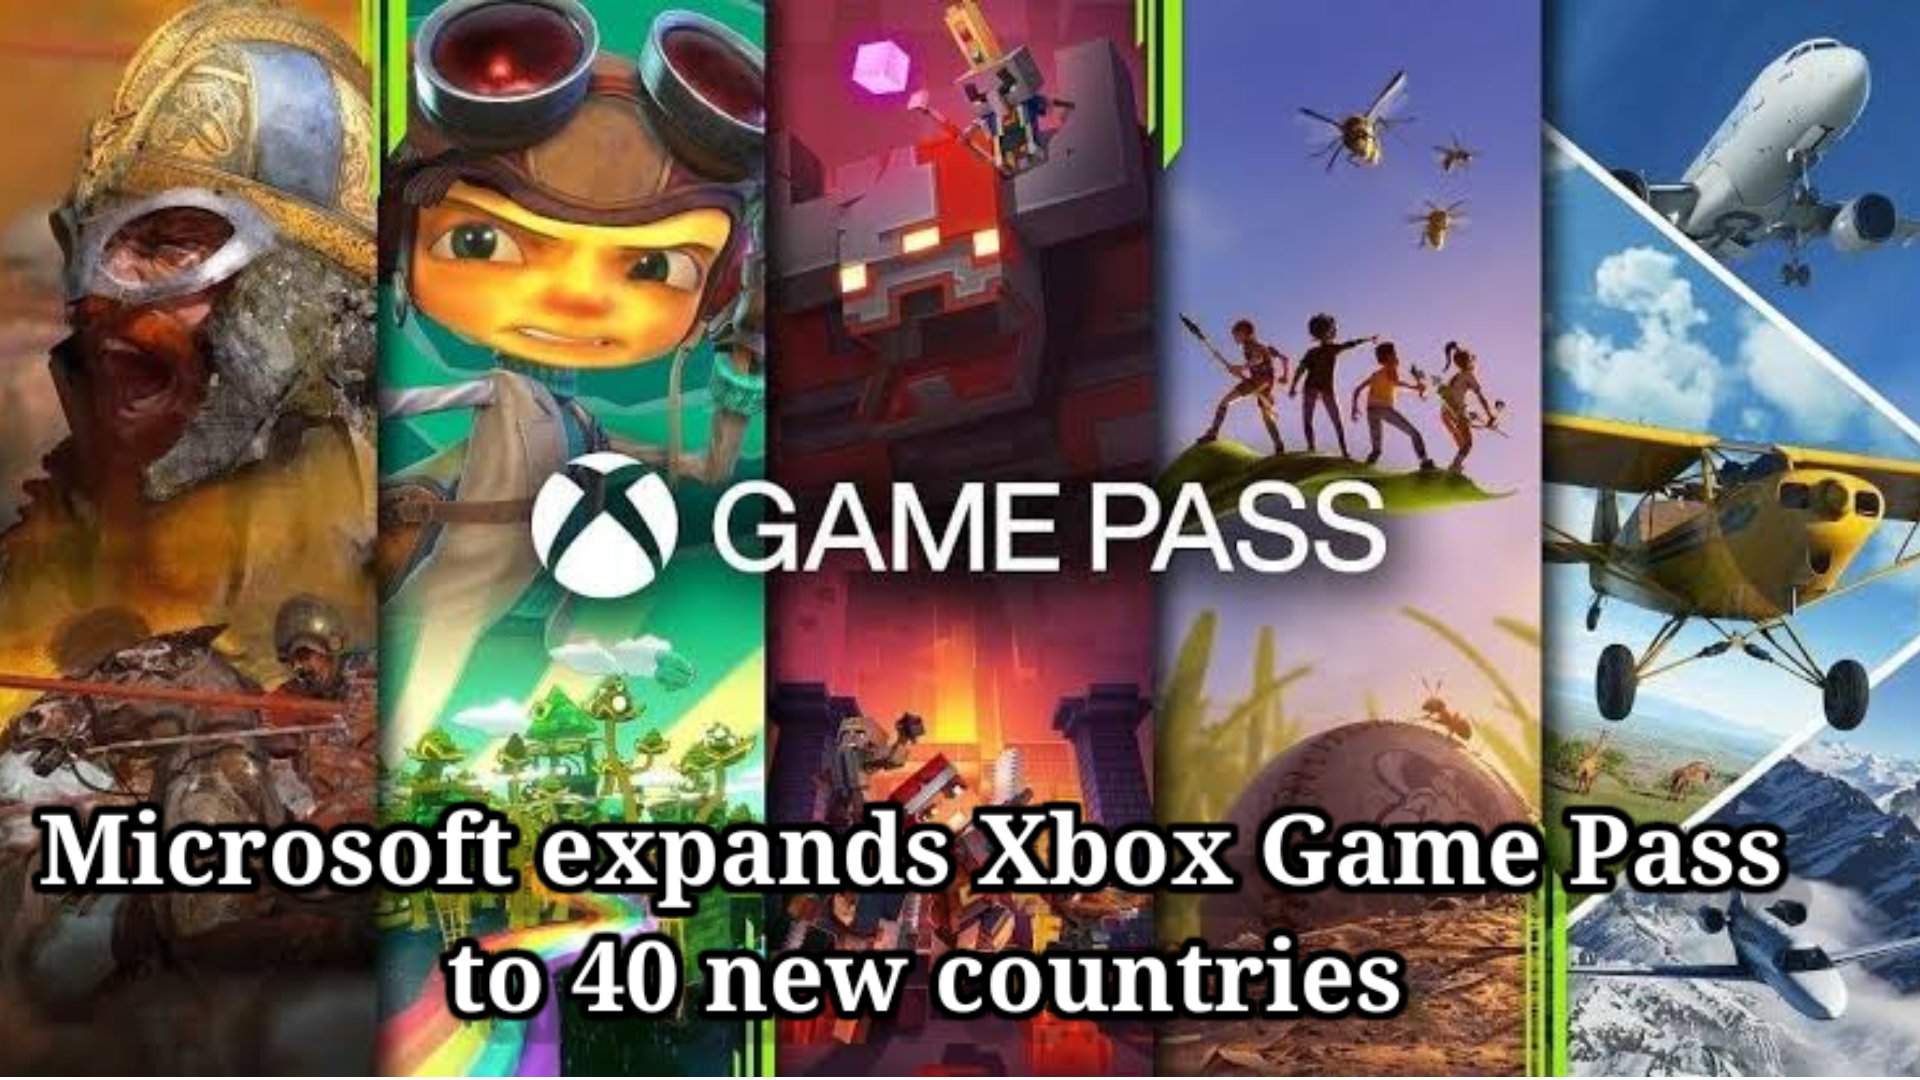 Microsoft expands Xbox Game Pass to 40 new countries